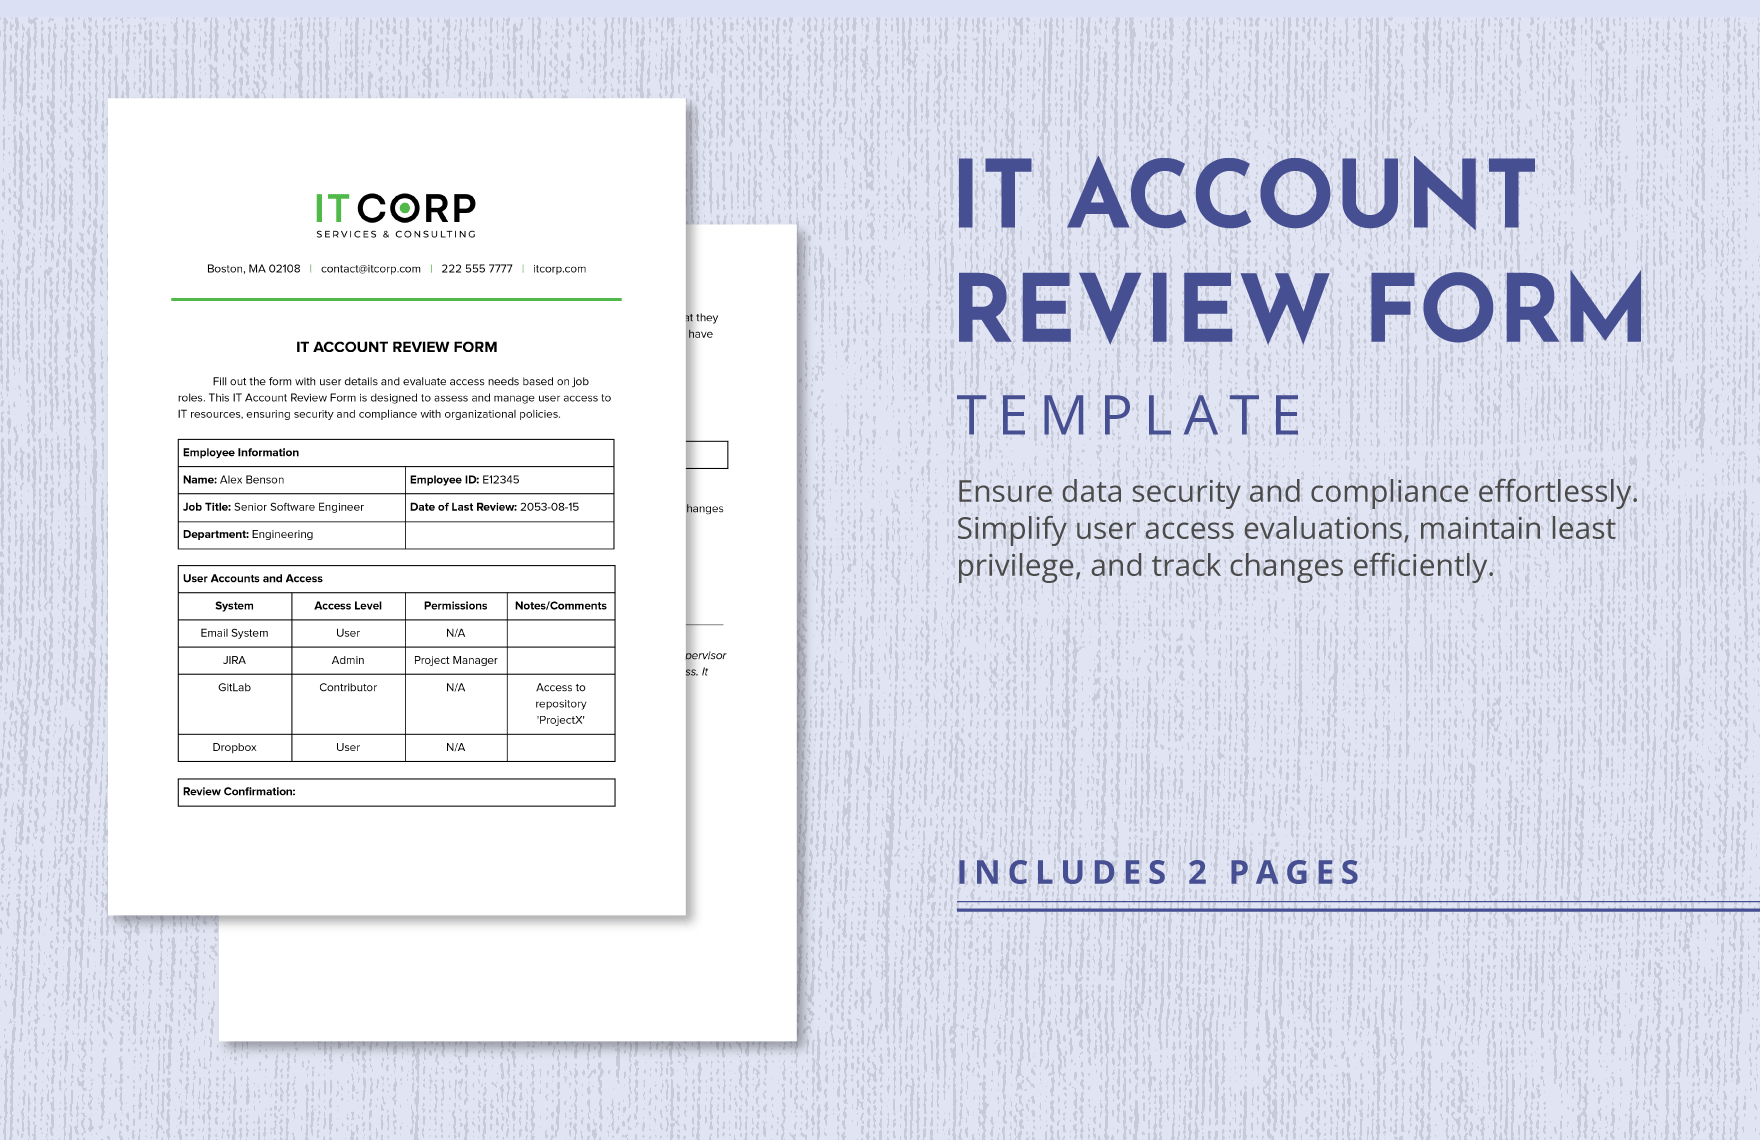 IT Account Review Form Template